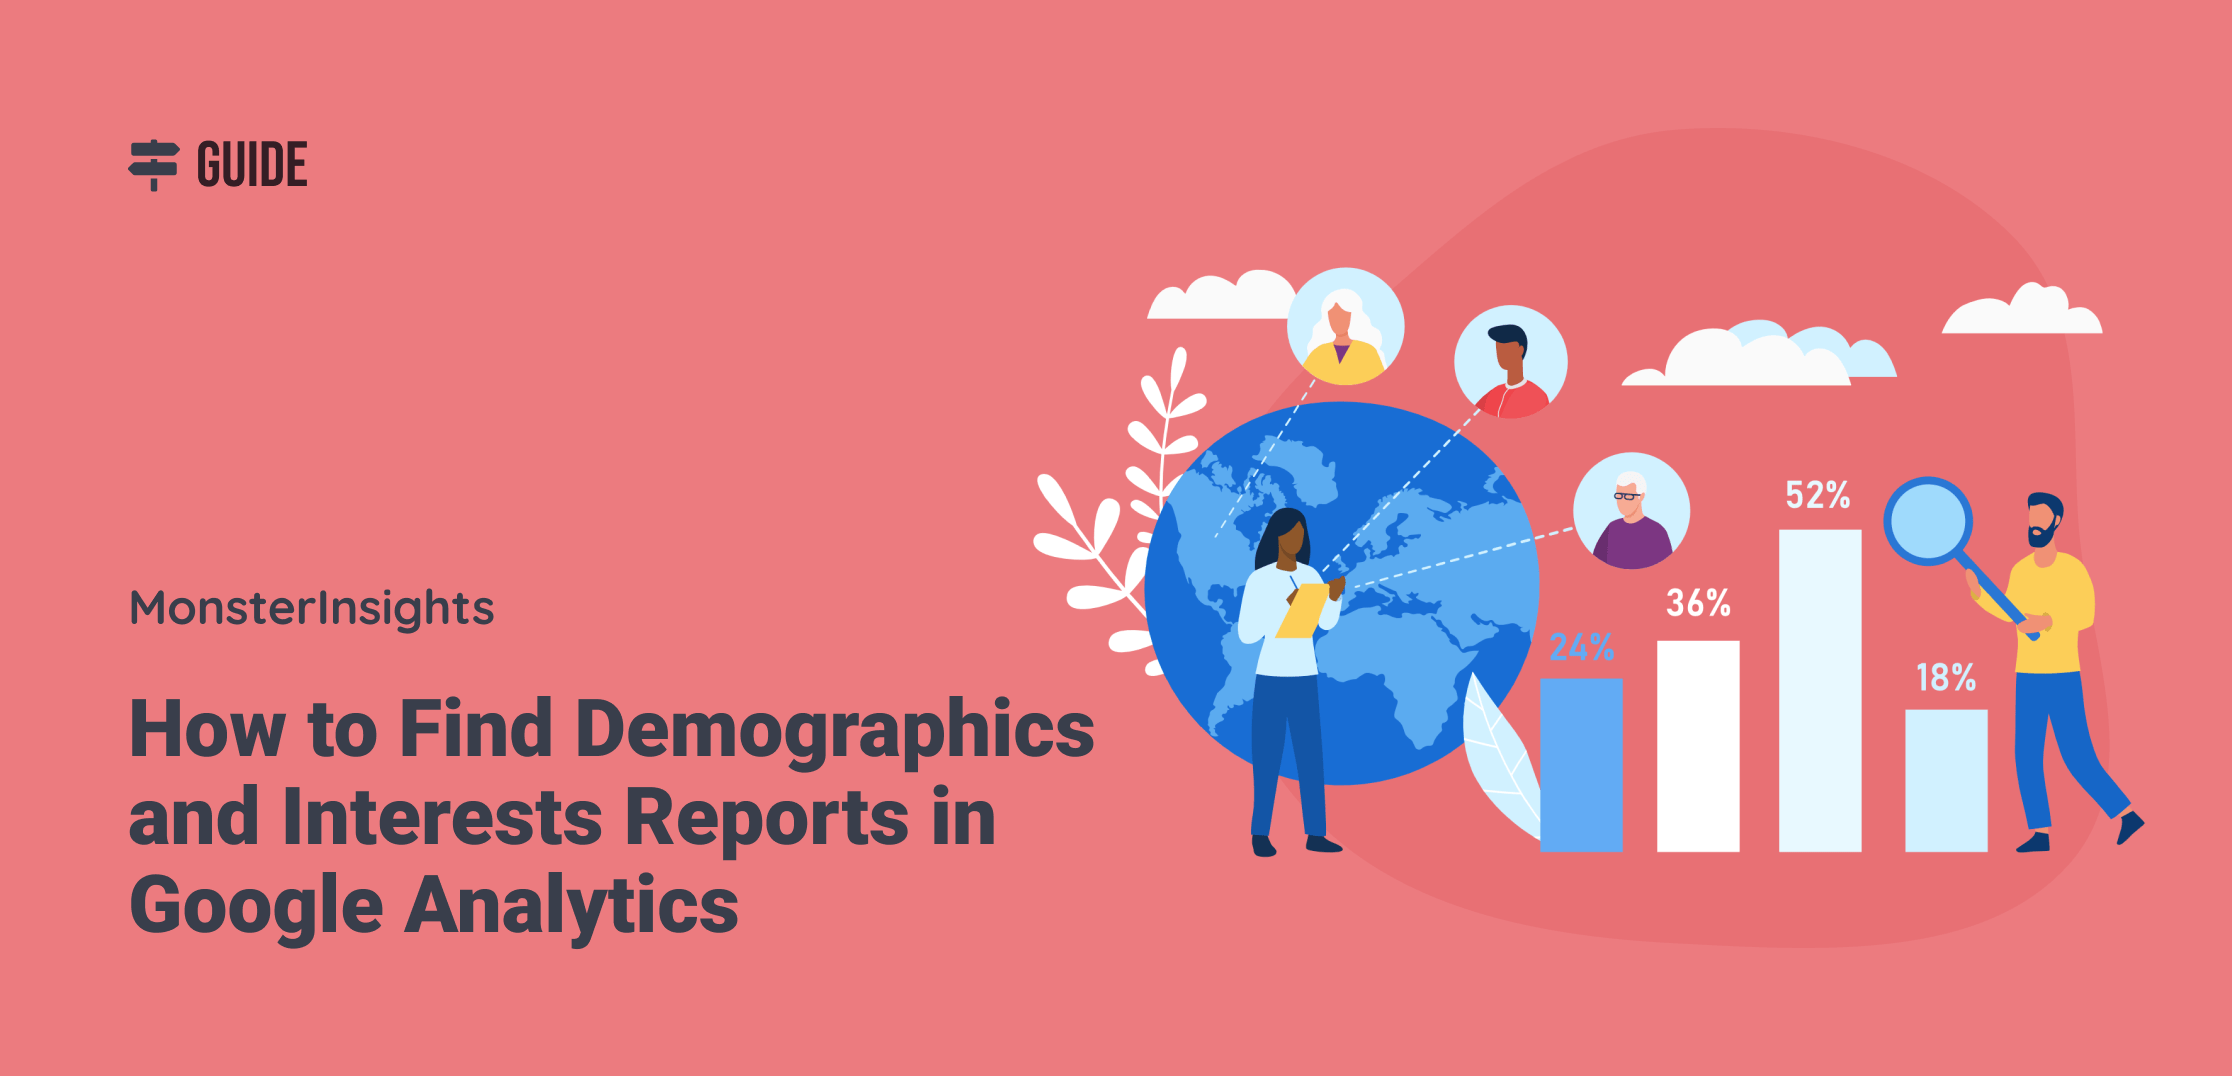 Advanced Targeting With Google Analytics Interest And Demographic Reports.